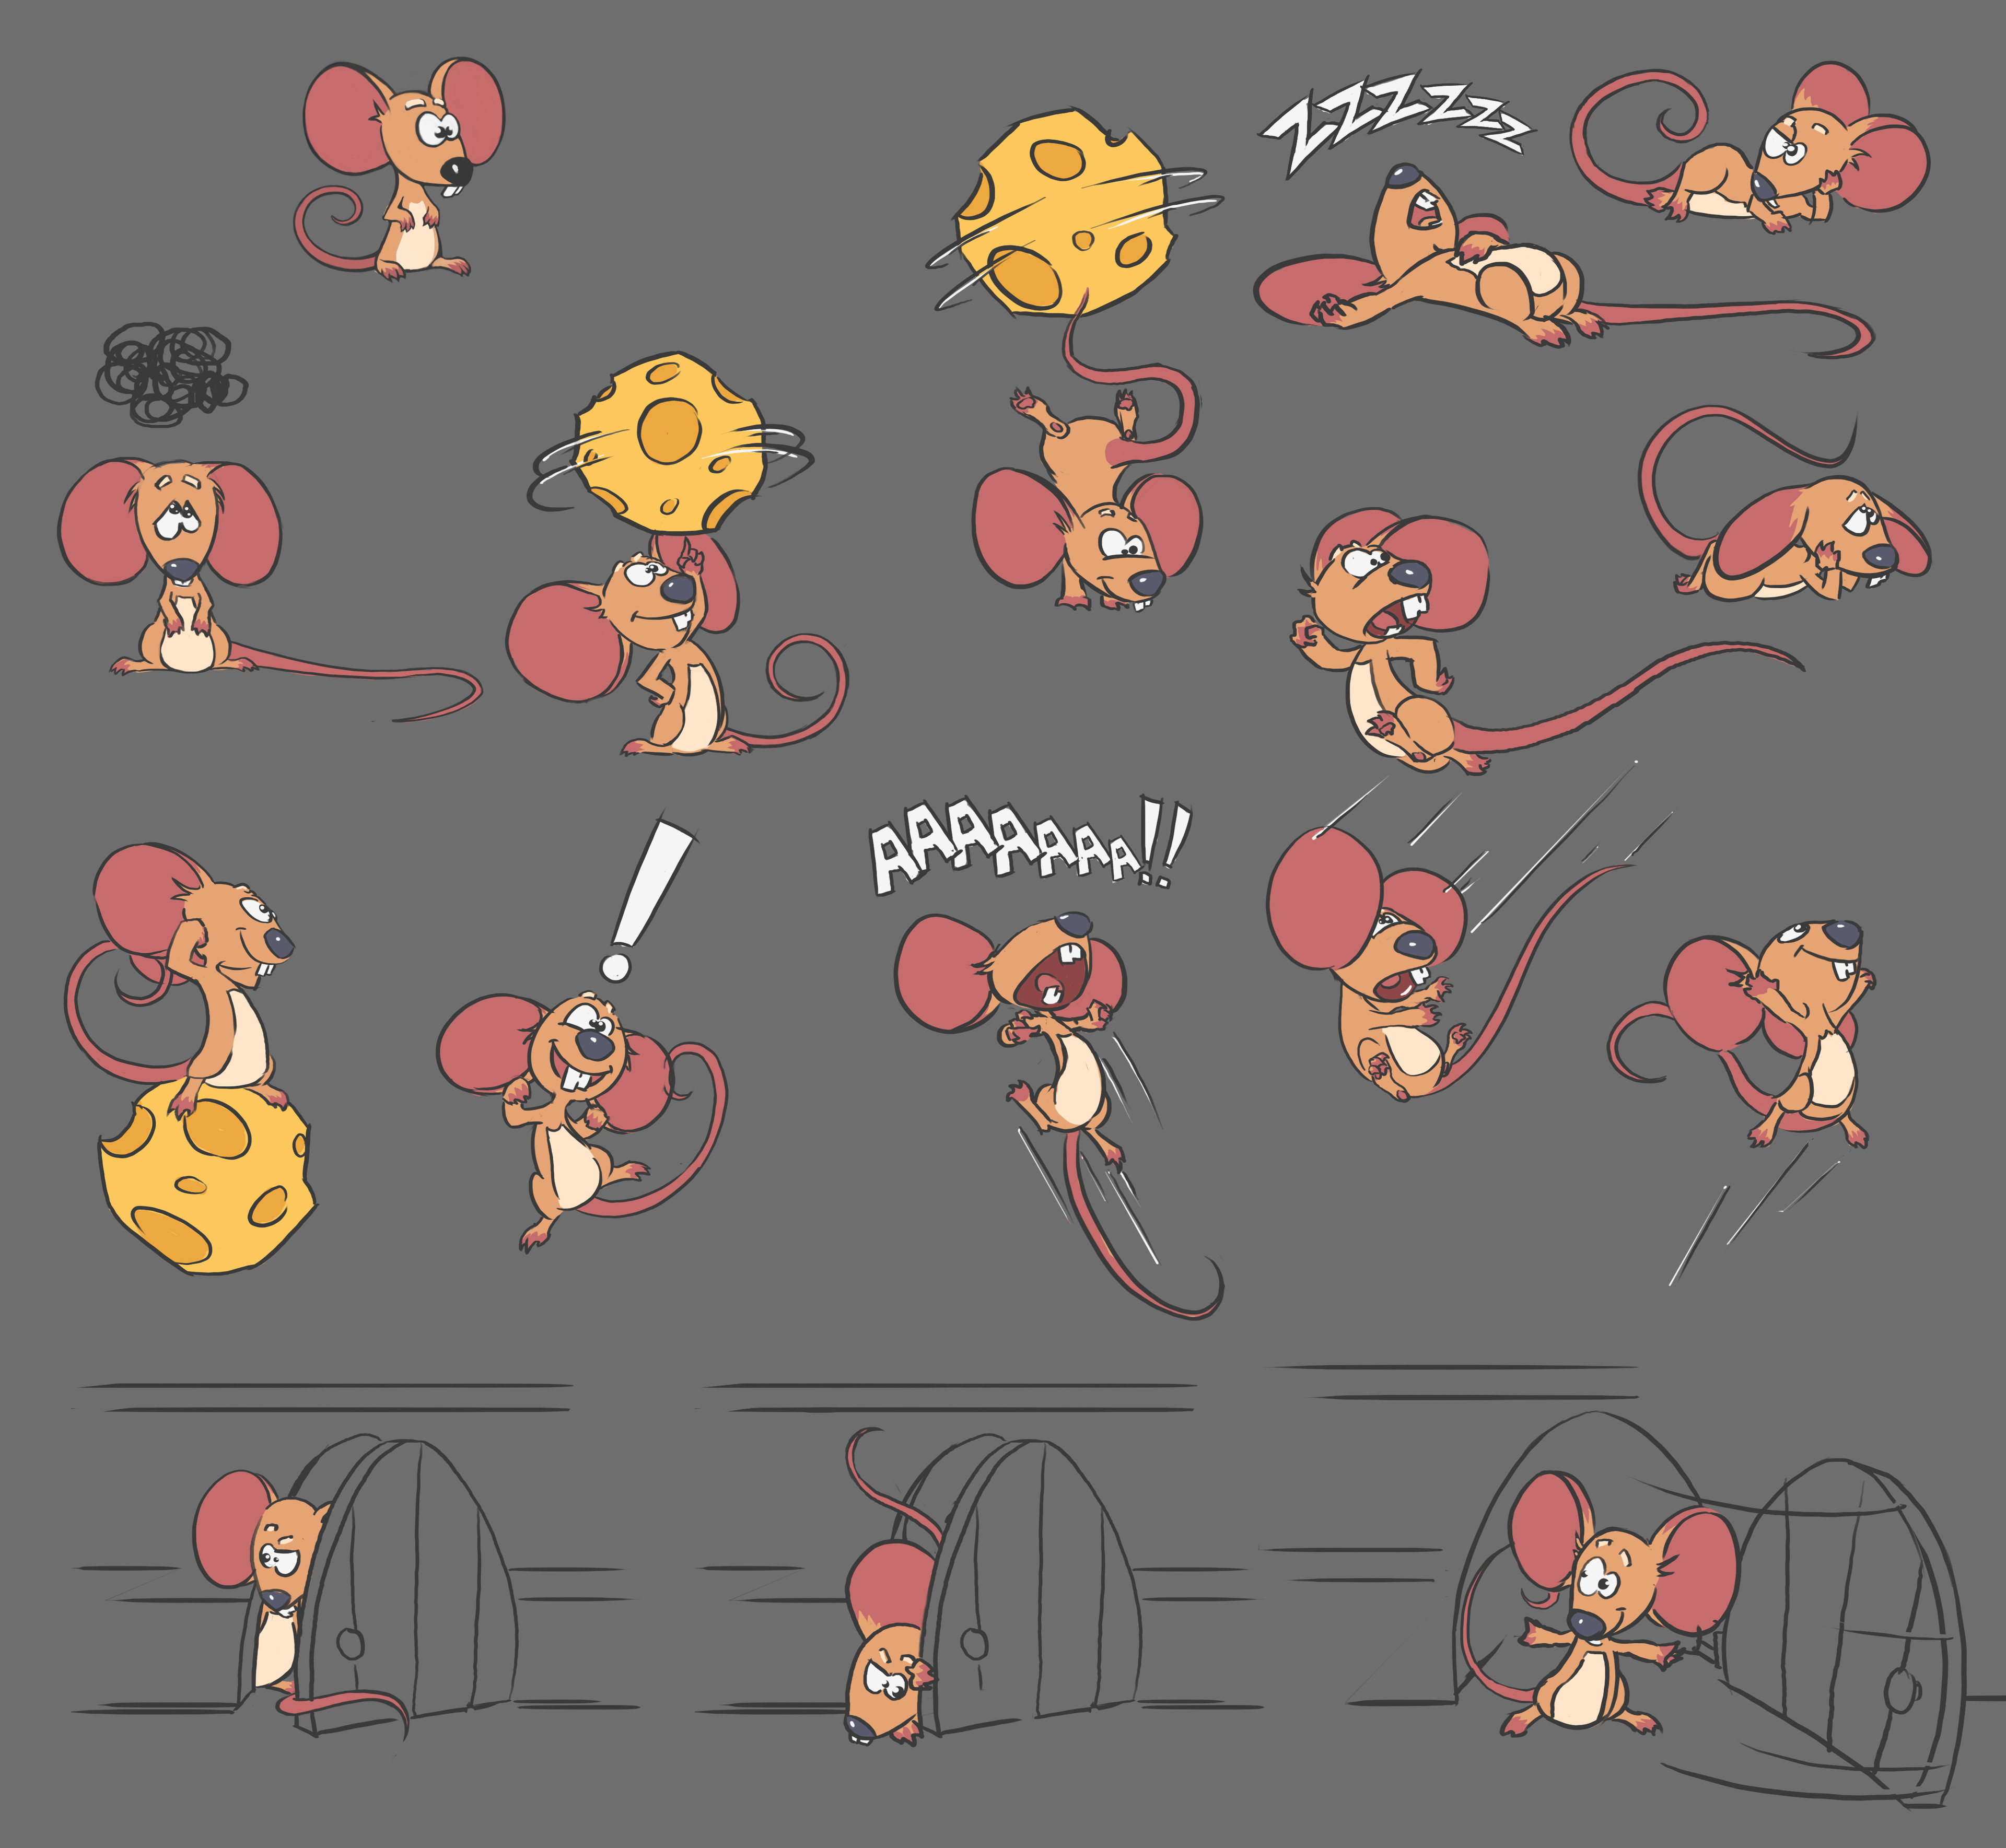 Emotion states for our mouse hero